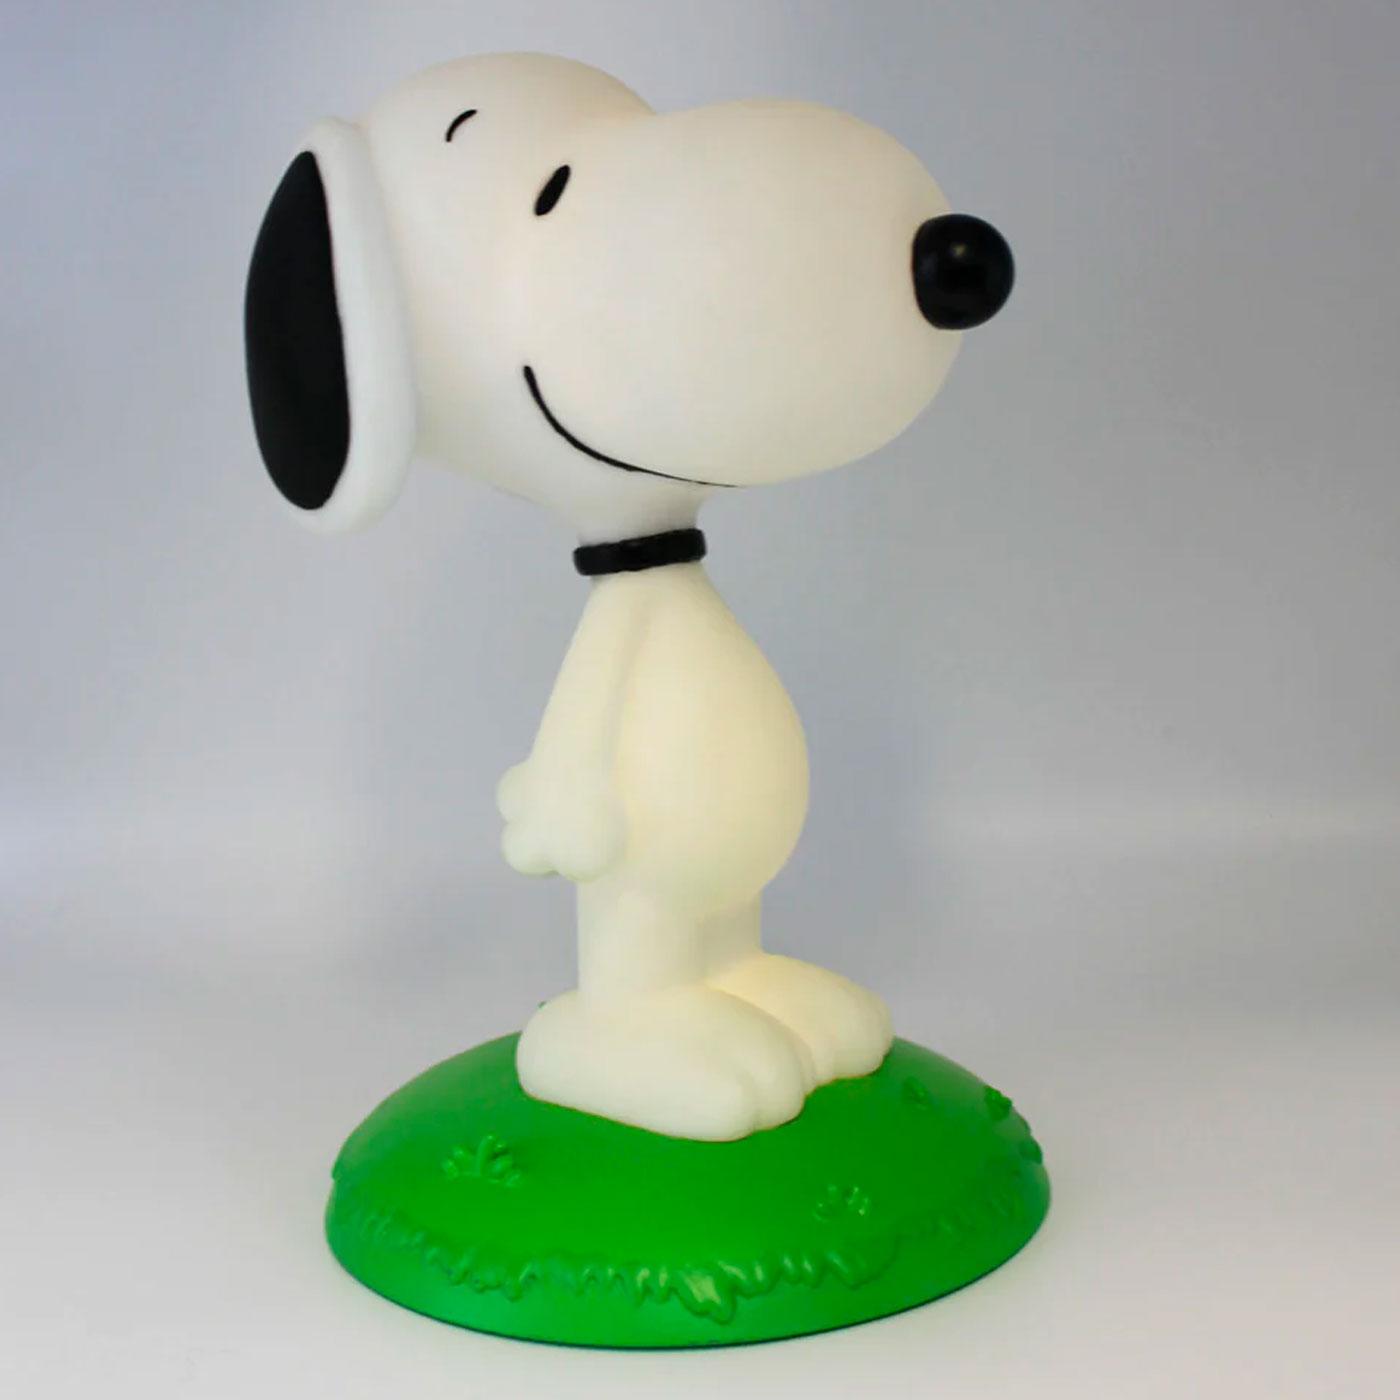 PEANUTS Retro 70s Snoopy Rechargeable LED Light